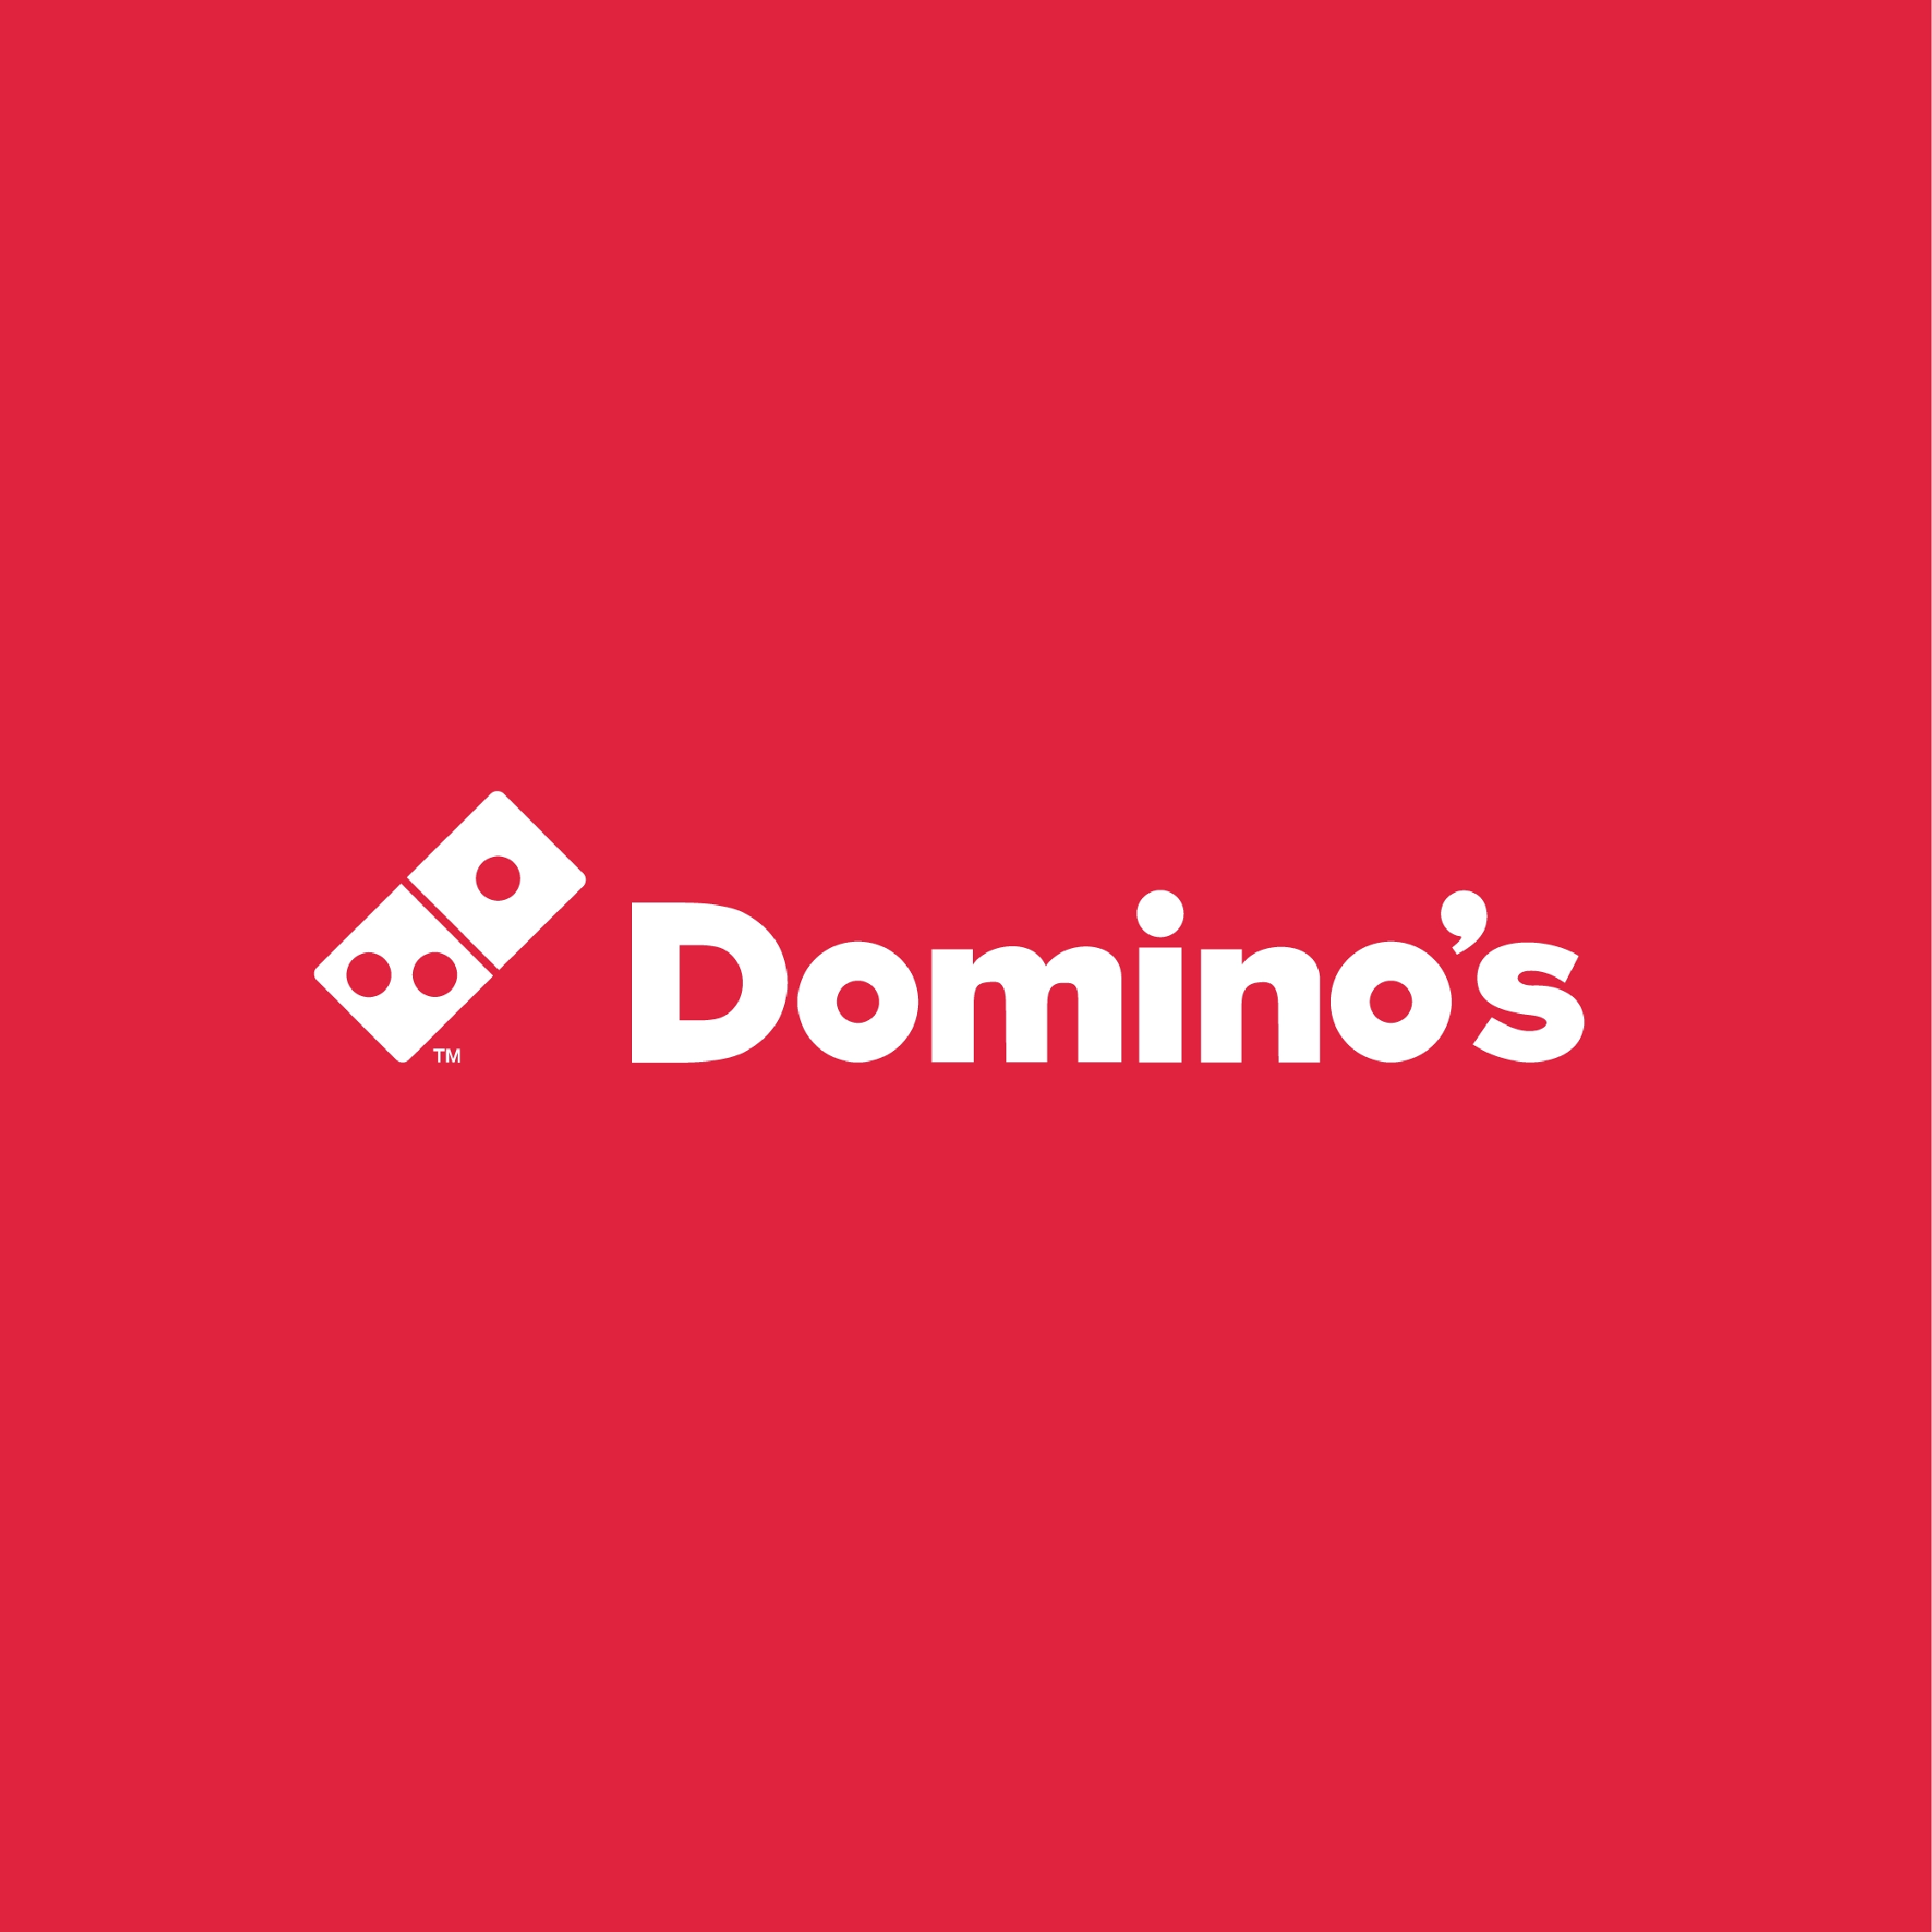 Thinking outside the box with Domino's